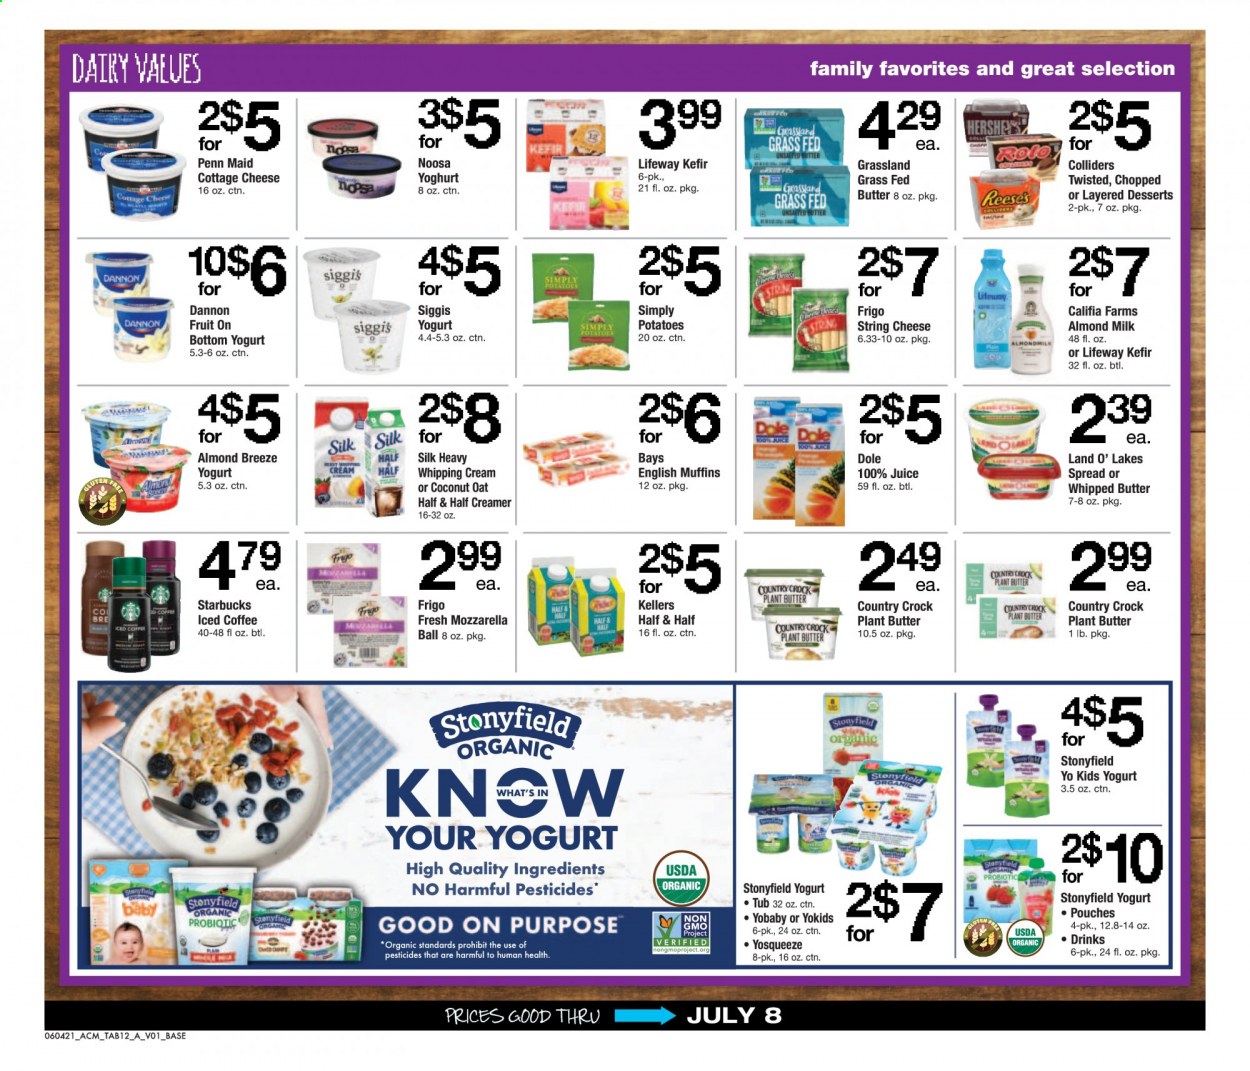 thumbnail - ACME Flyer - 06/04/2021 - 07/08/2021 - Sales products - english muffins, potatoes, Dole, cottage cheese, mozzarella, string cheese, cheese, yoghurt, Dannon, almond milk, Silk, Almond Breeze, kefir, whipped butter, creamer, whipping cream, Reese's, oats, juice, iced coffee, Starbucks, Half and half. Page 12.